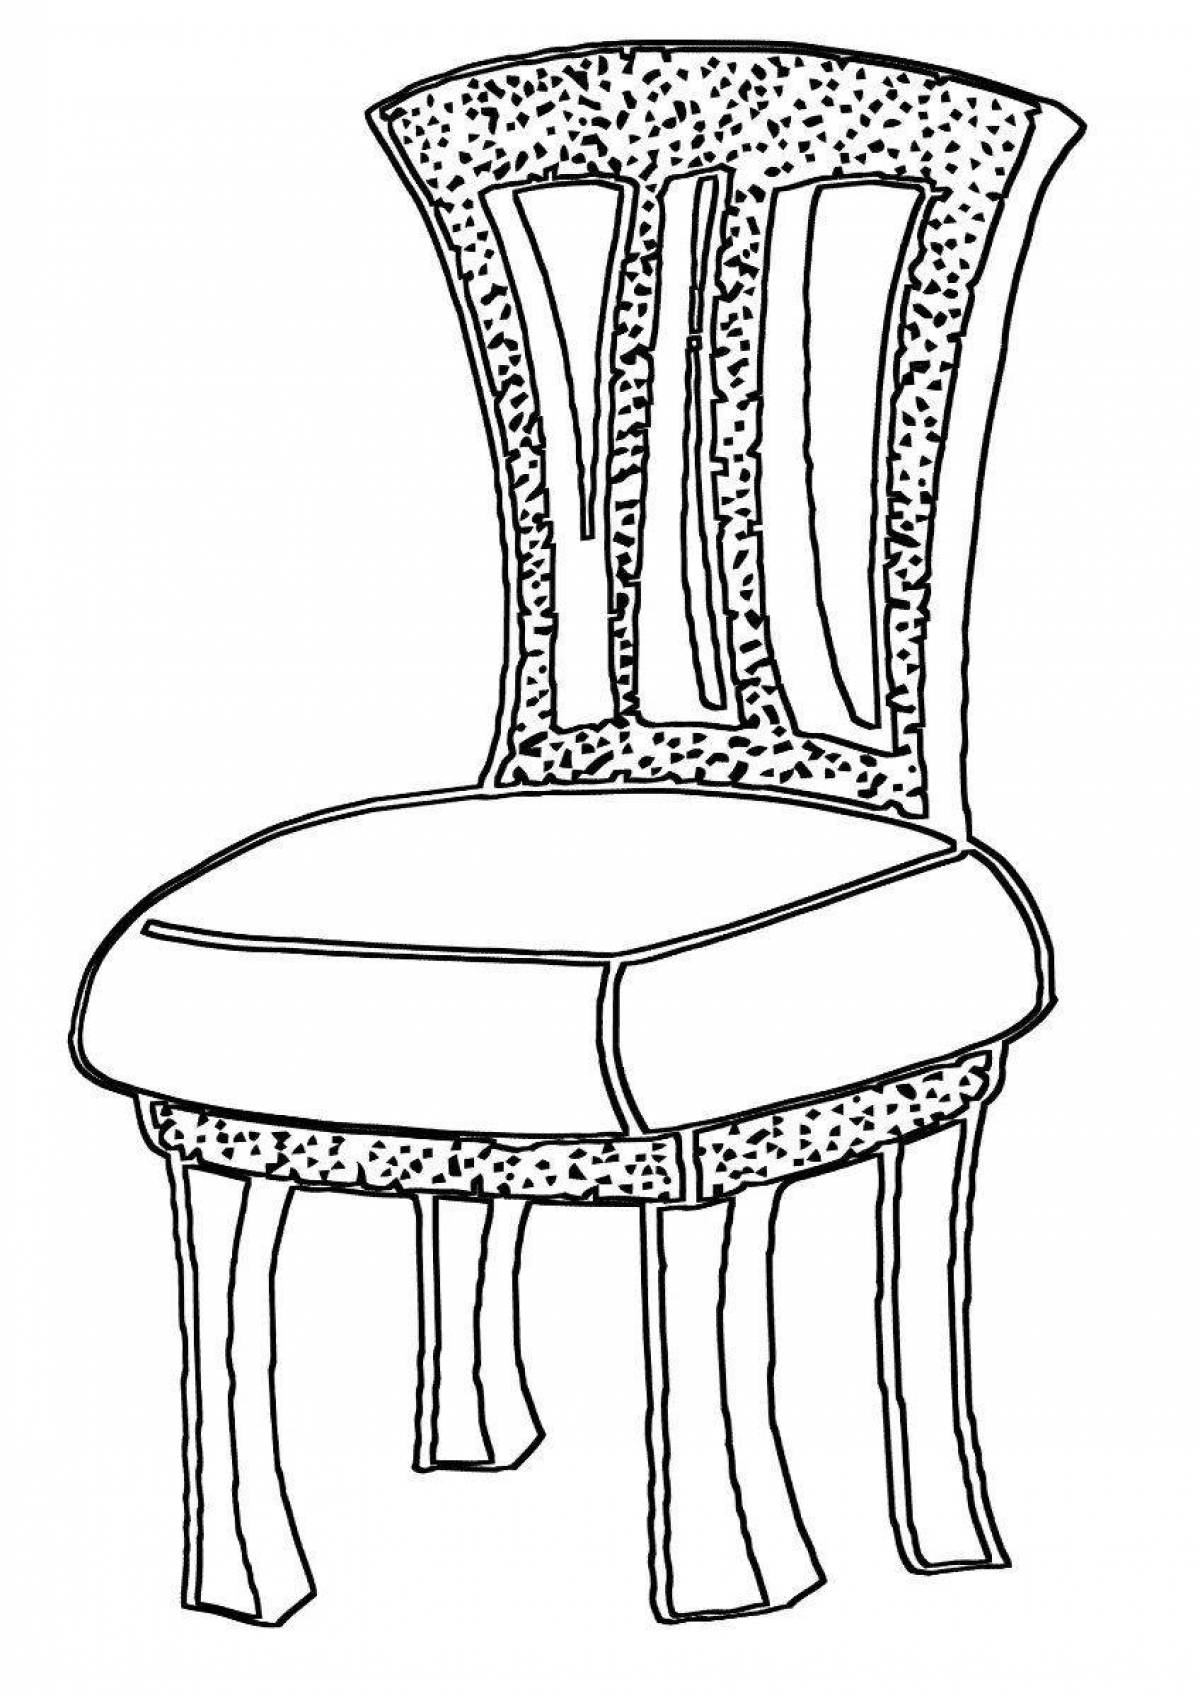 Coloring page stylish high chair